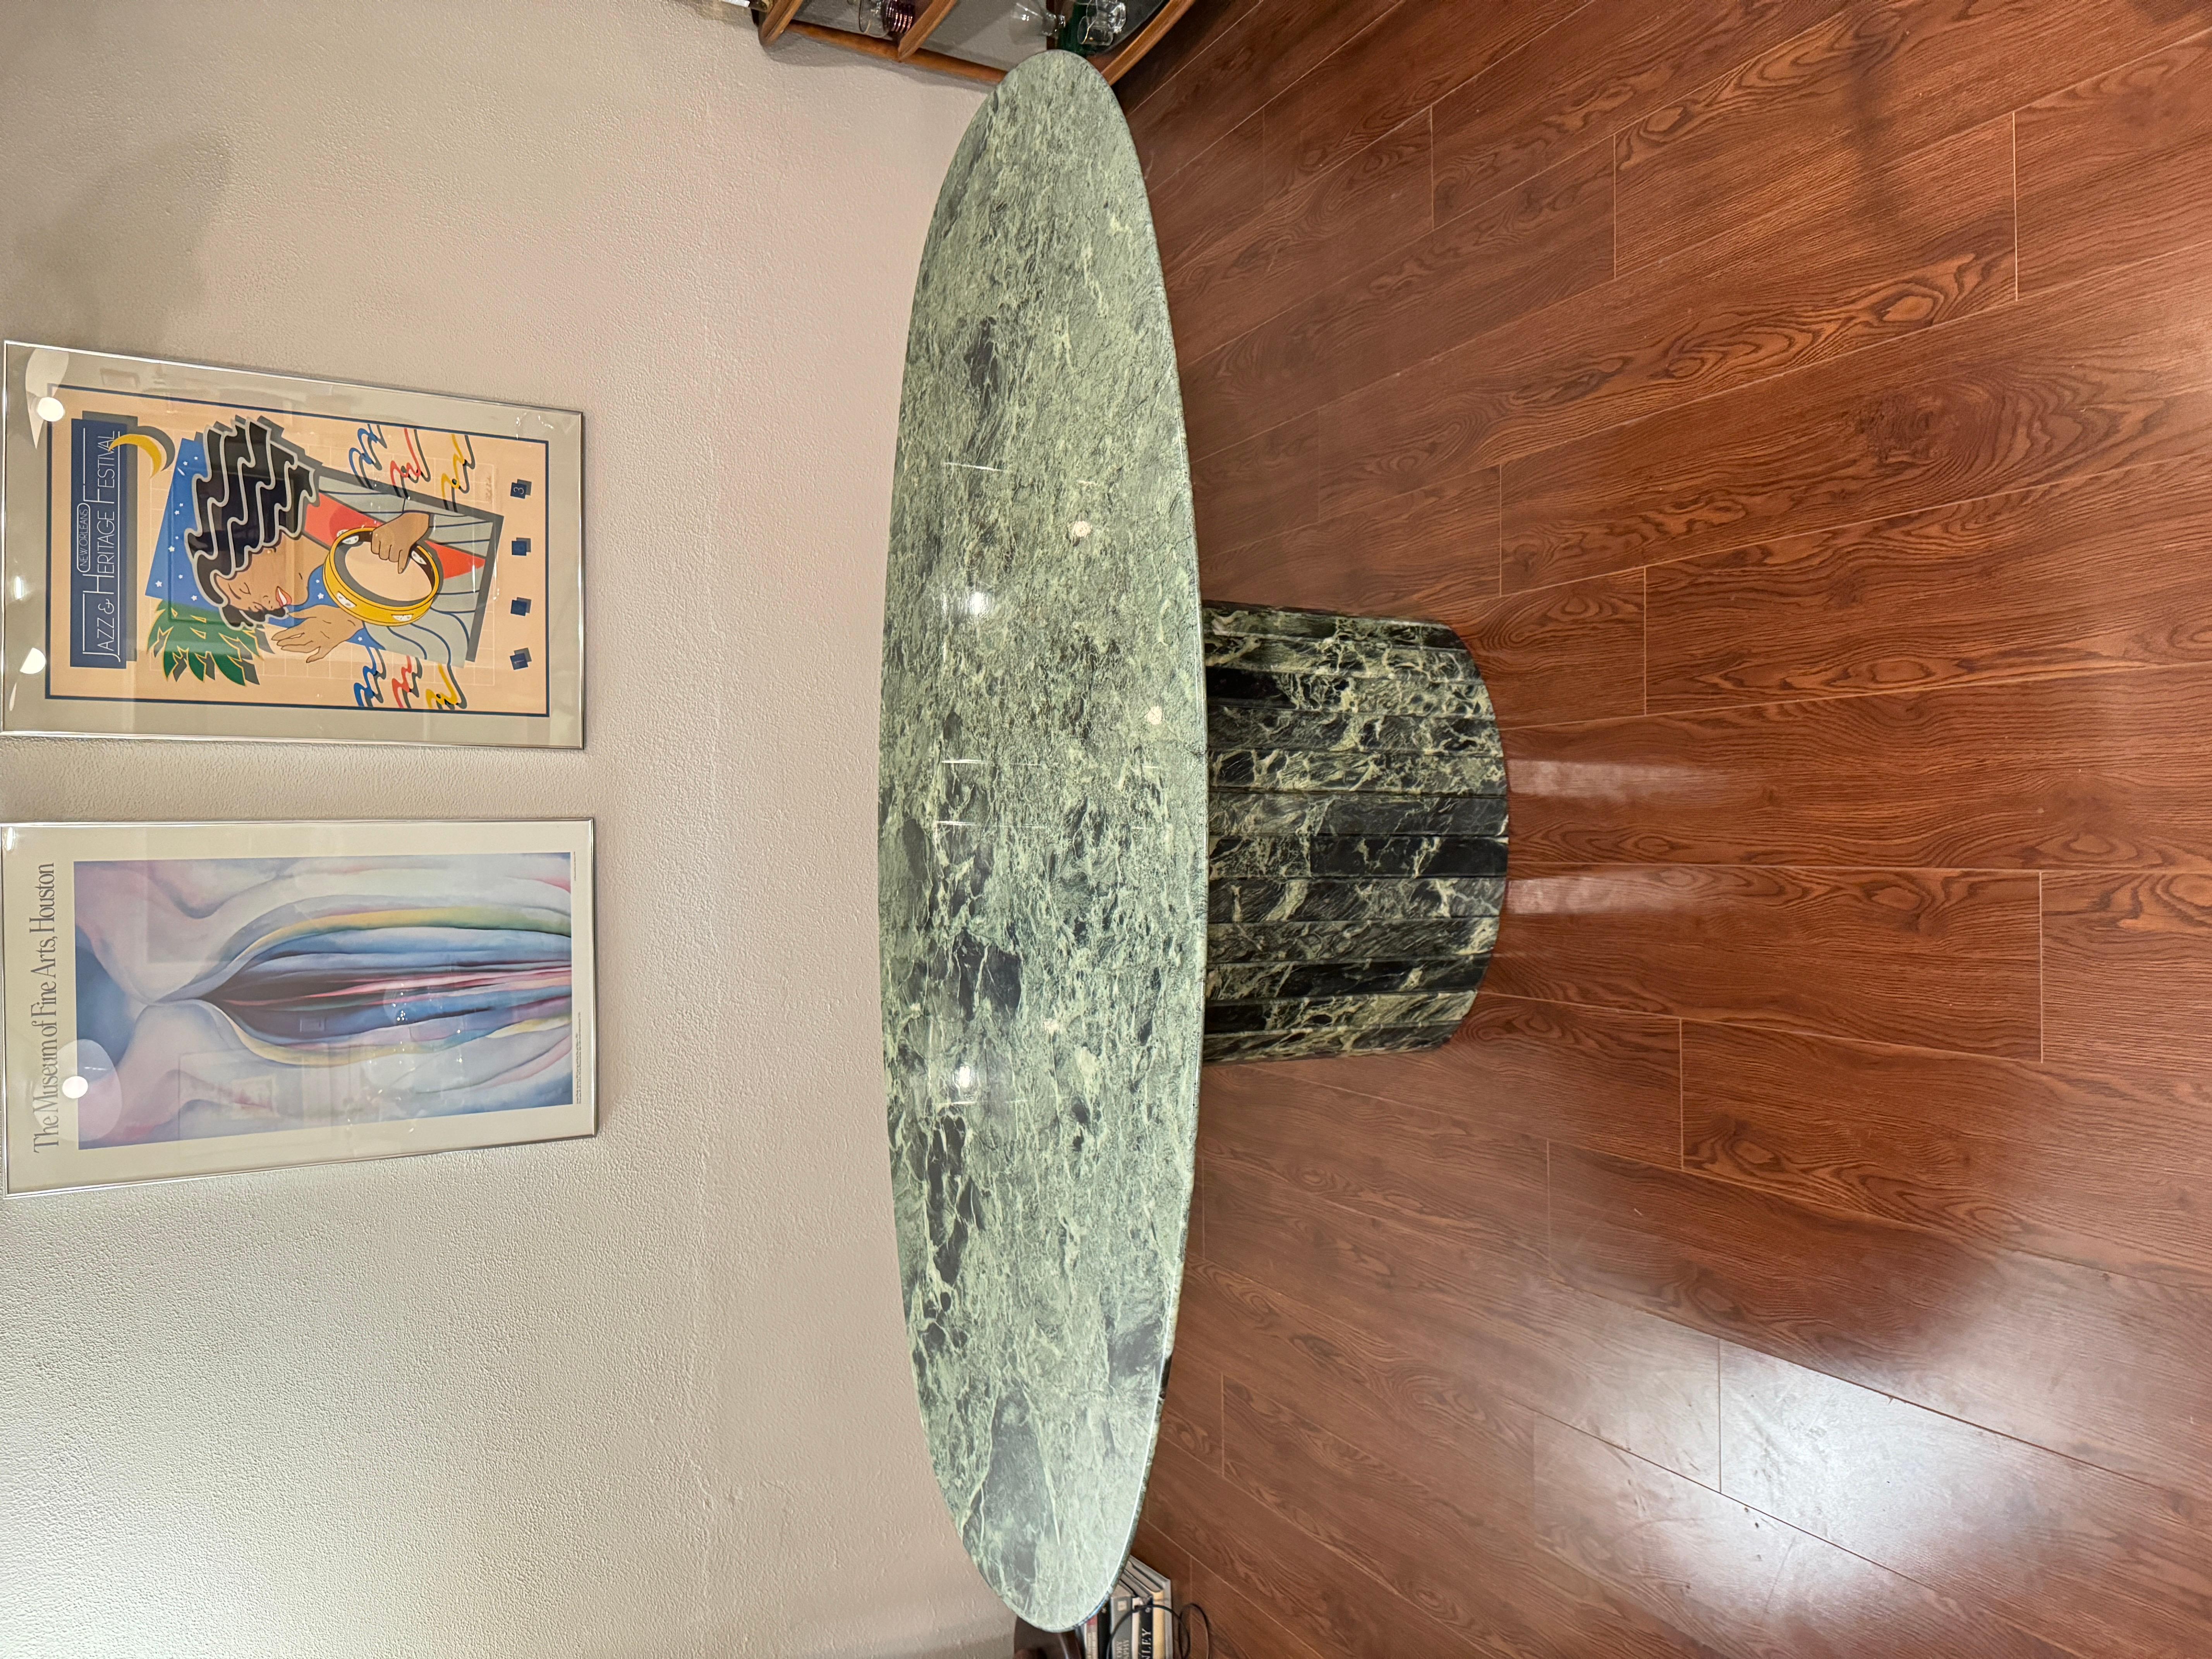 Gorgeous post modern green oval marble dining table by Roche & Bobois. Has a pedestal paneled base. Made in Italy circa 1970s. In very good original condition, with no chips or cracks. Just some minor scratching on the surface and expected wear from